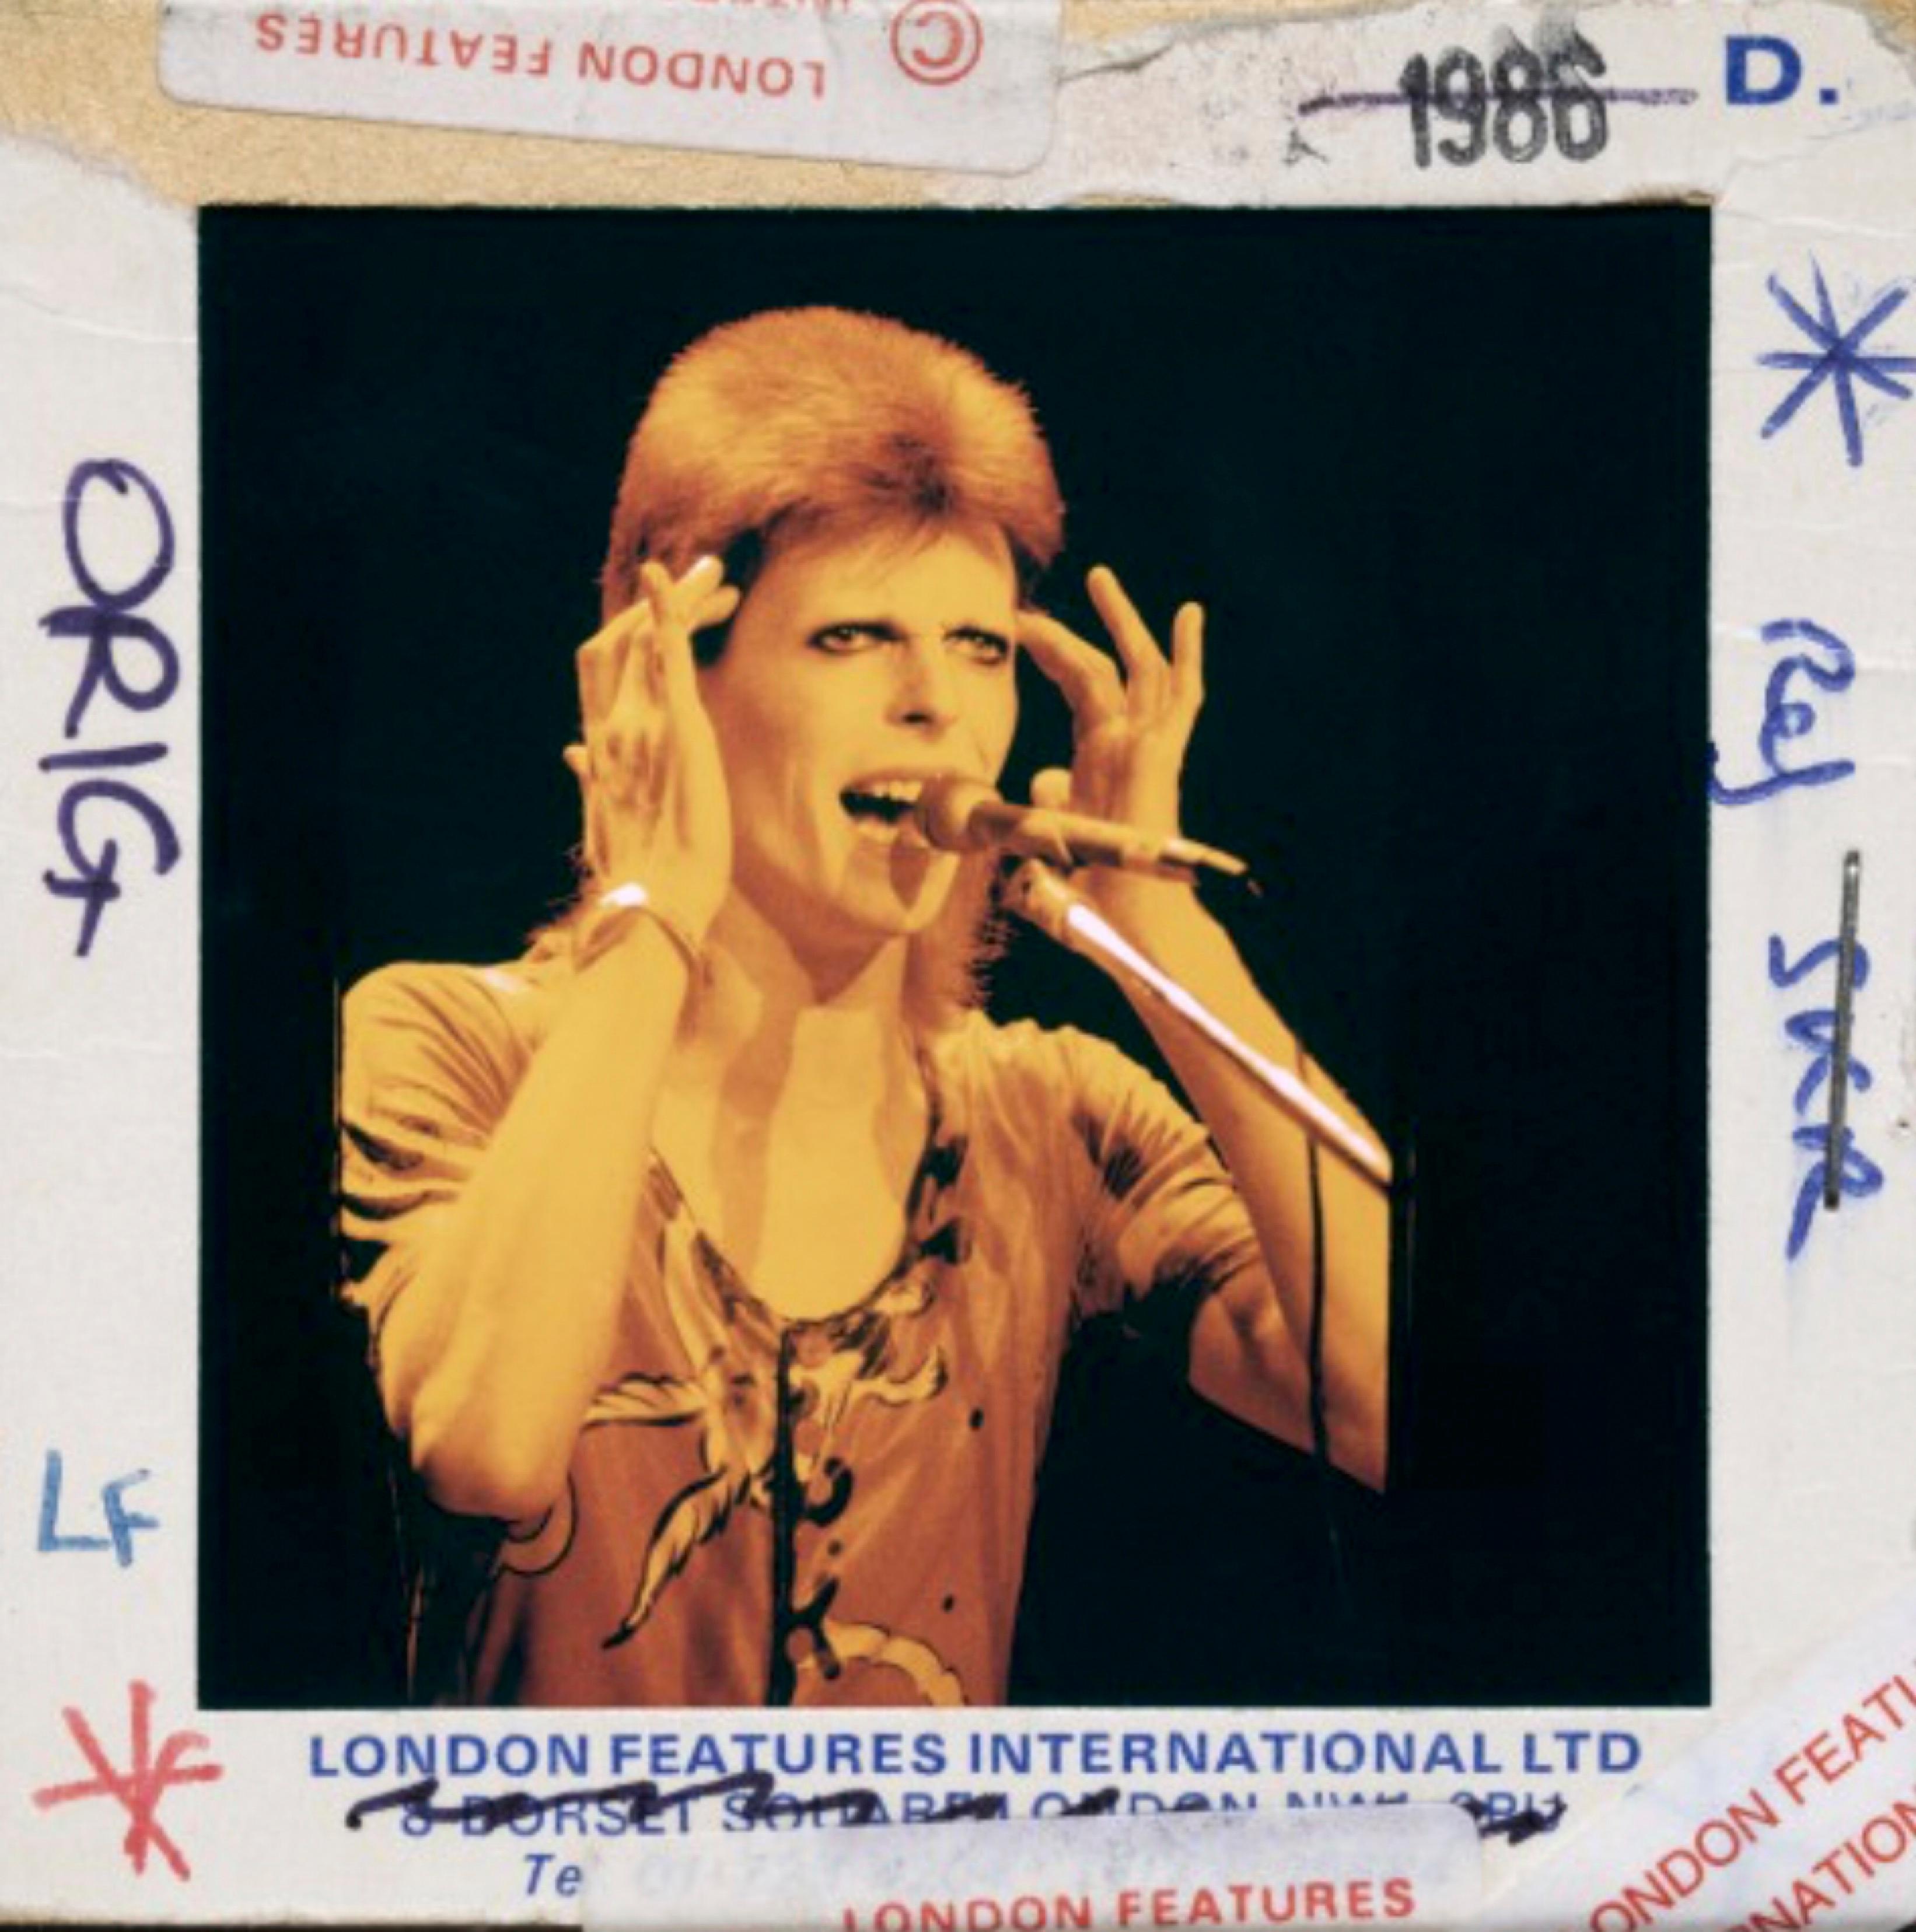 Globe Photo Archives Color Photograph - David Bowie Singing on Stage -  Oversize Limited Edition Print 